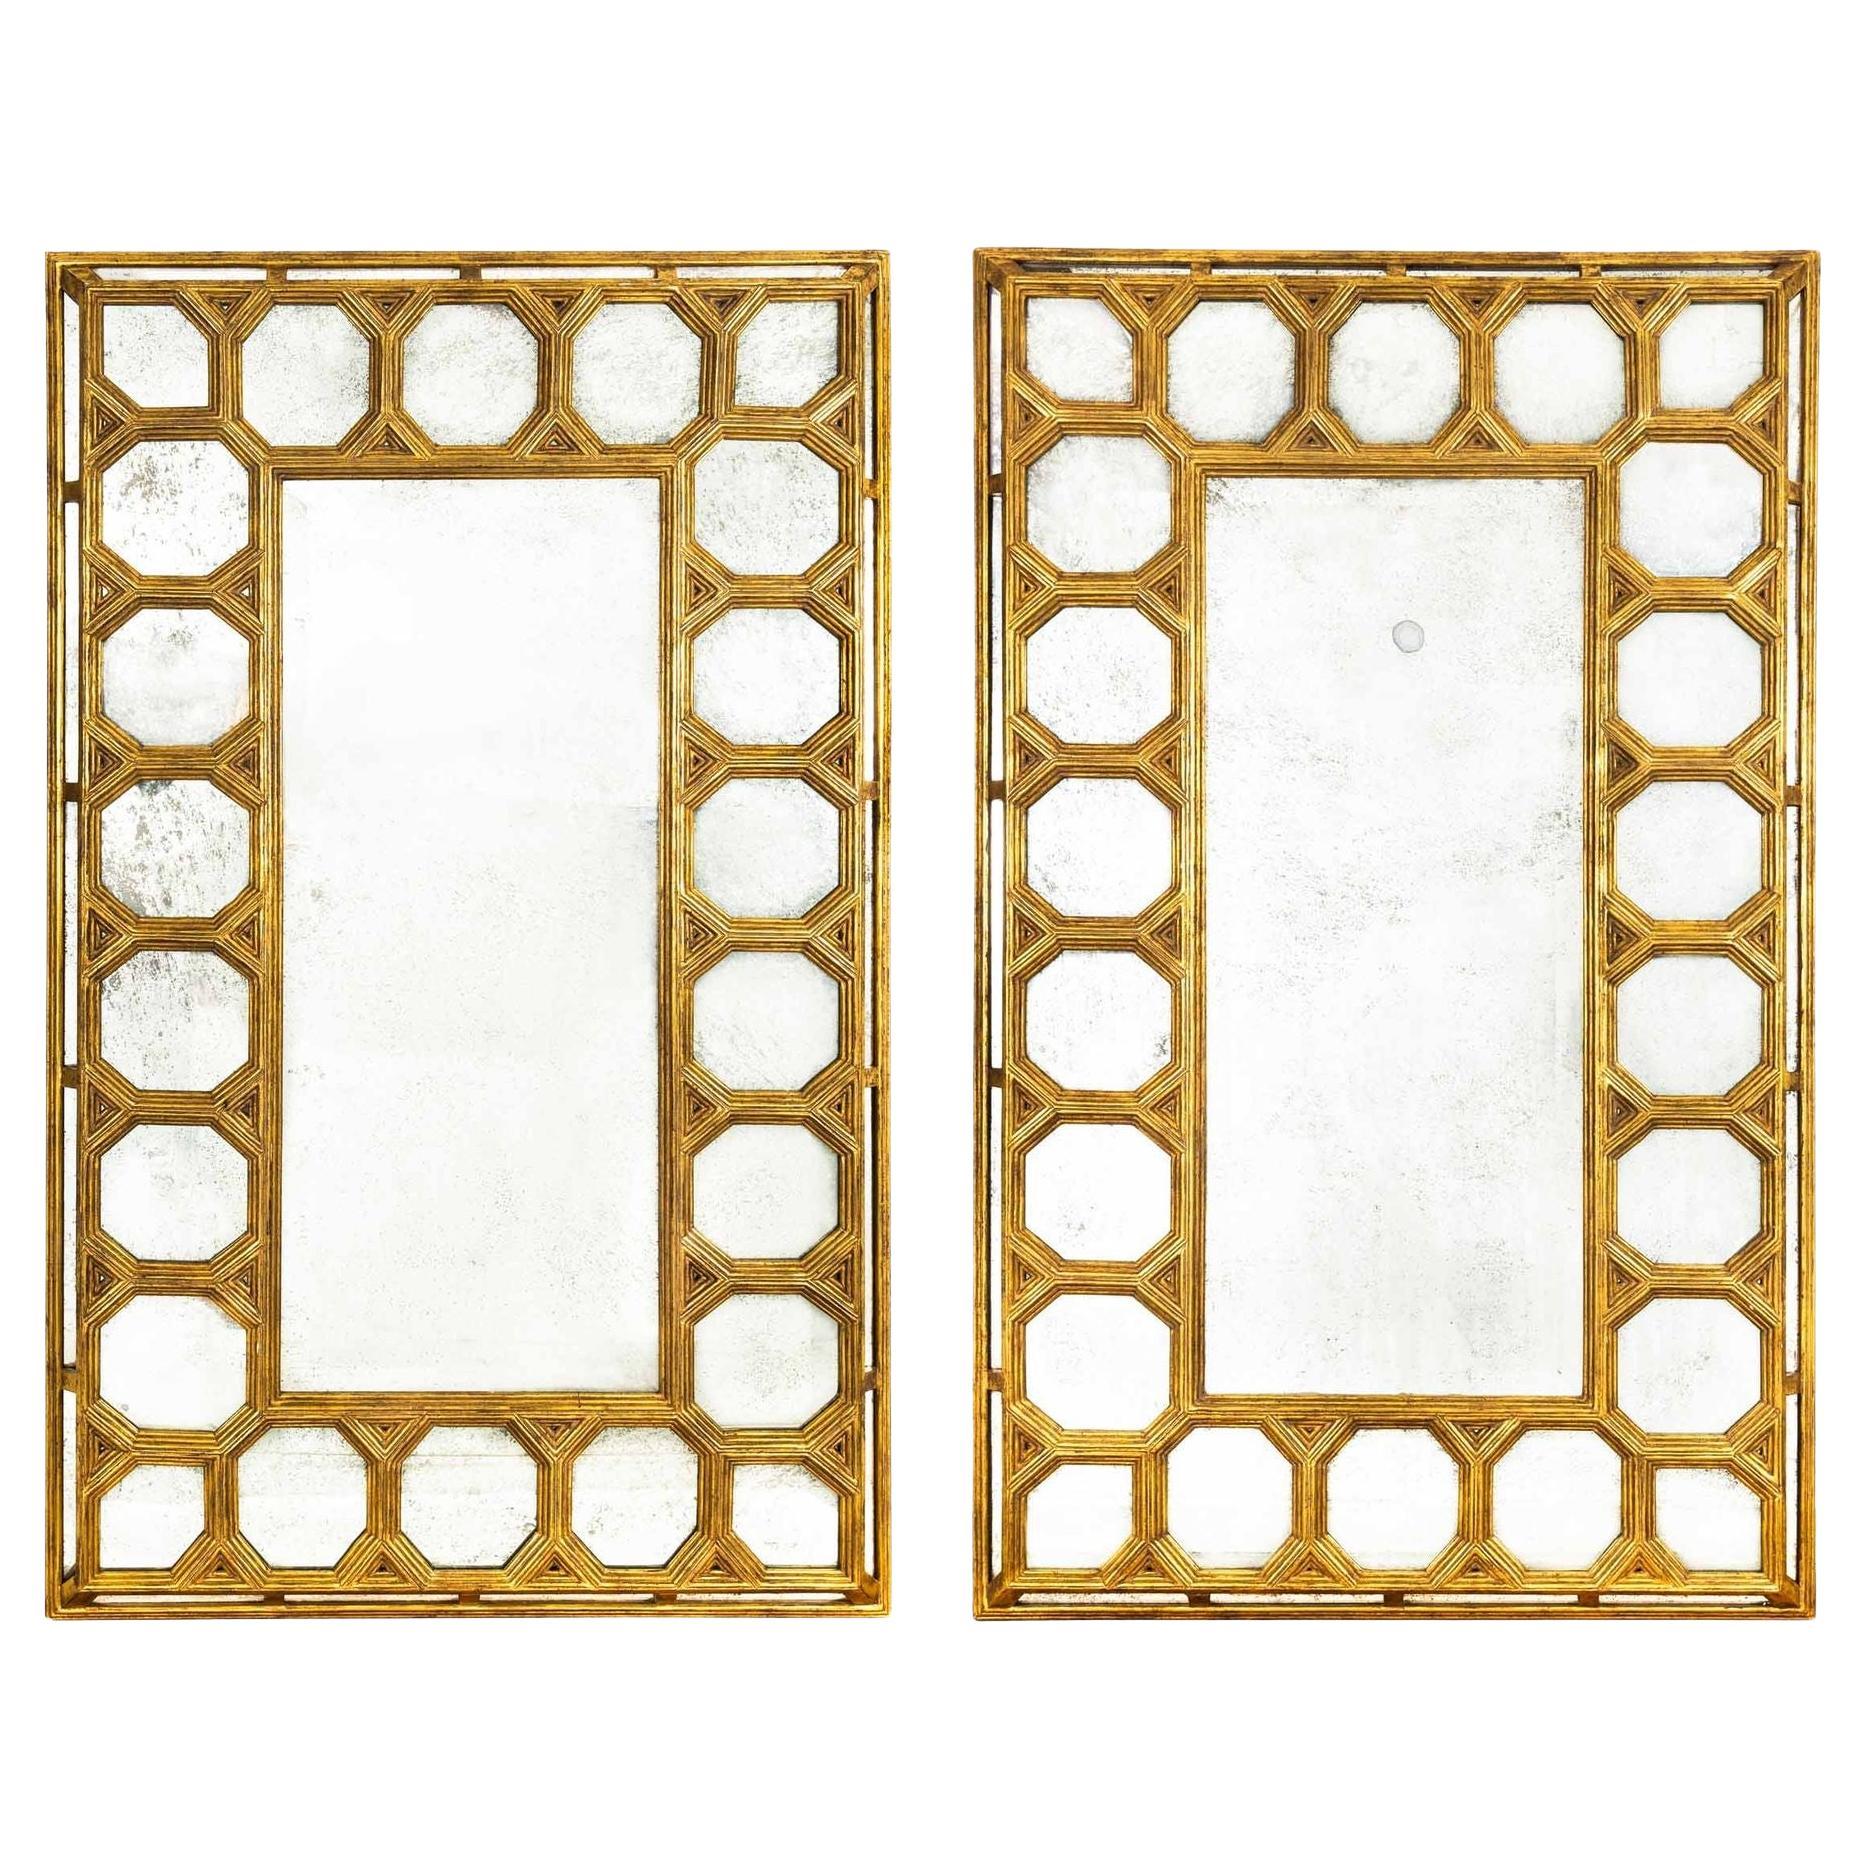 Incredibly Fine Pair Of 22k Giltwood "Graham 607" Mirrors By Dessin Fournir For Sale